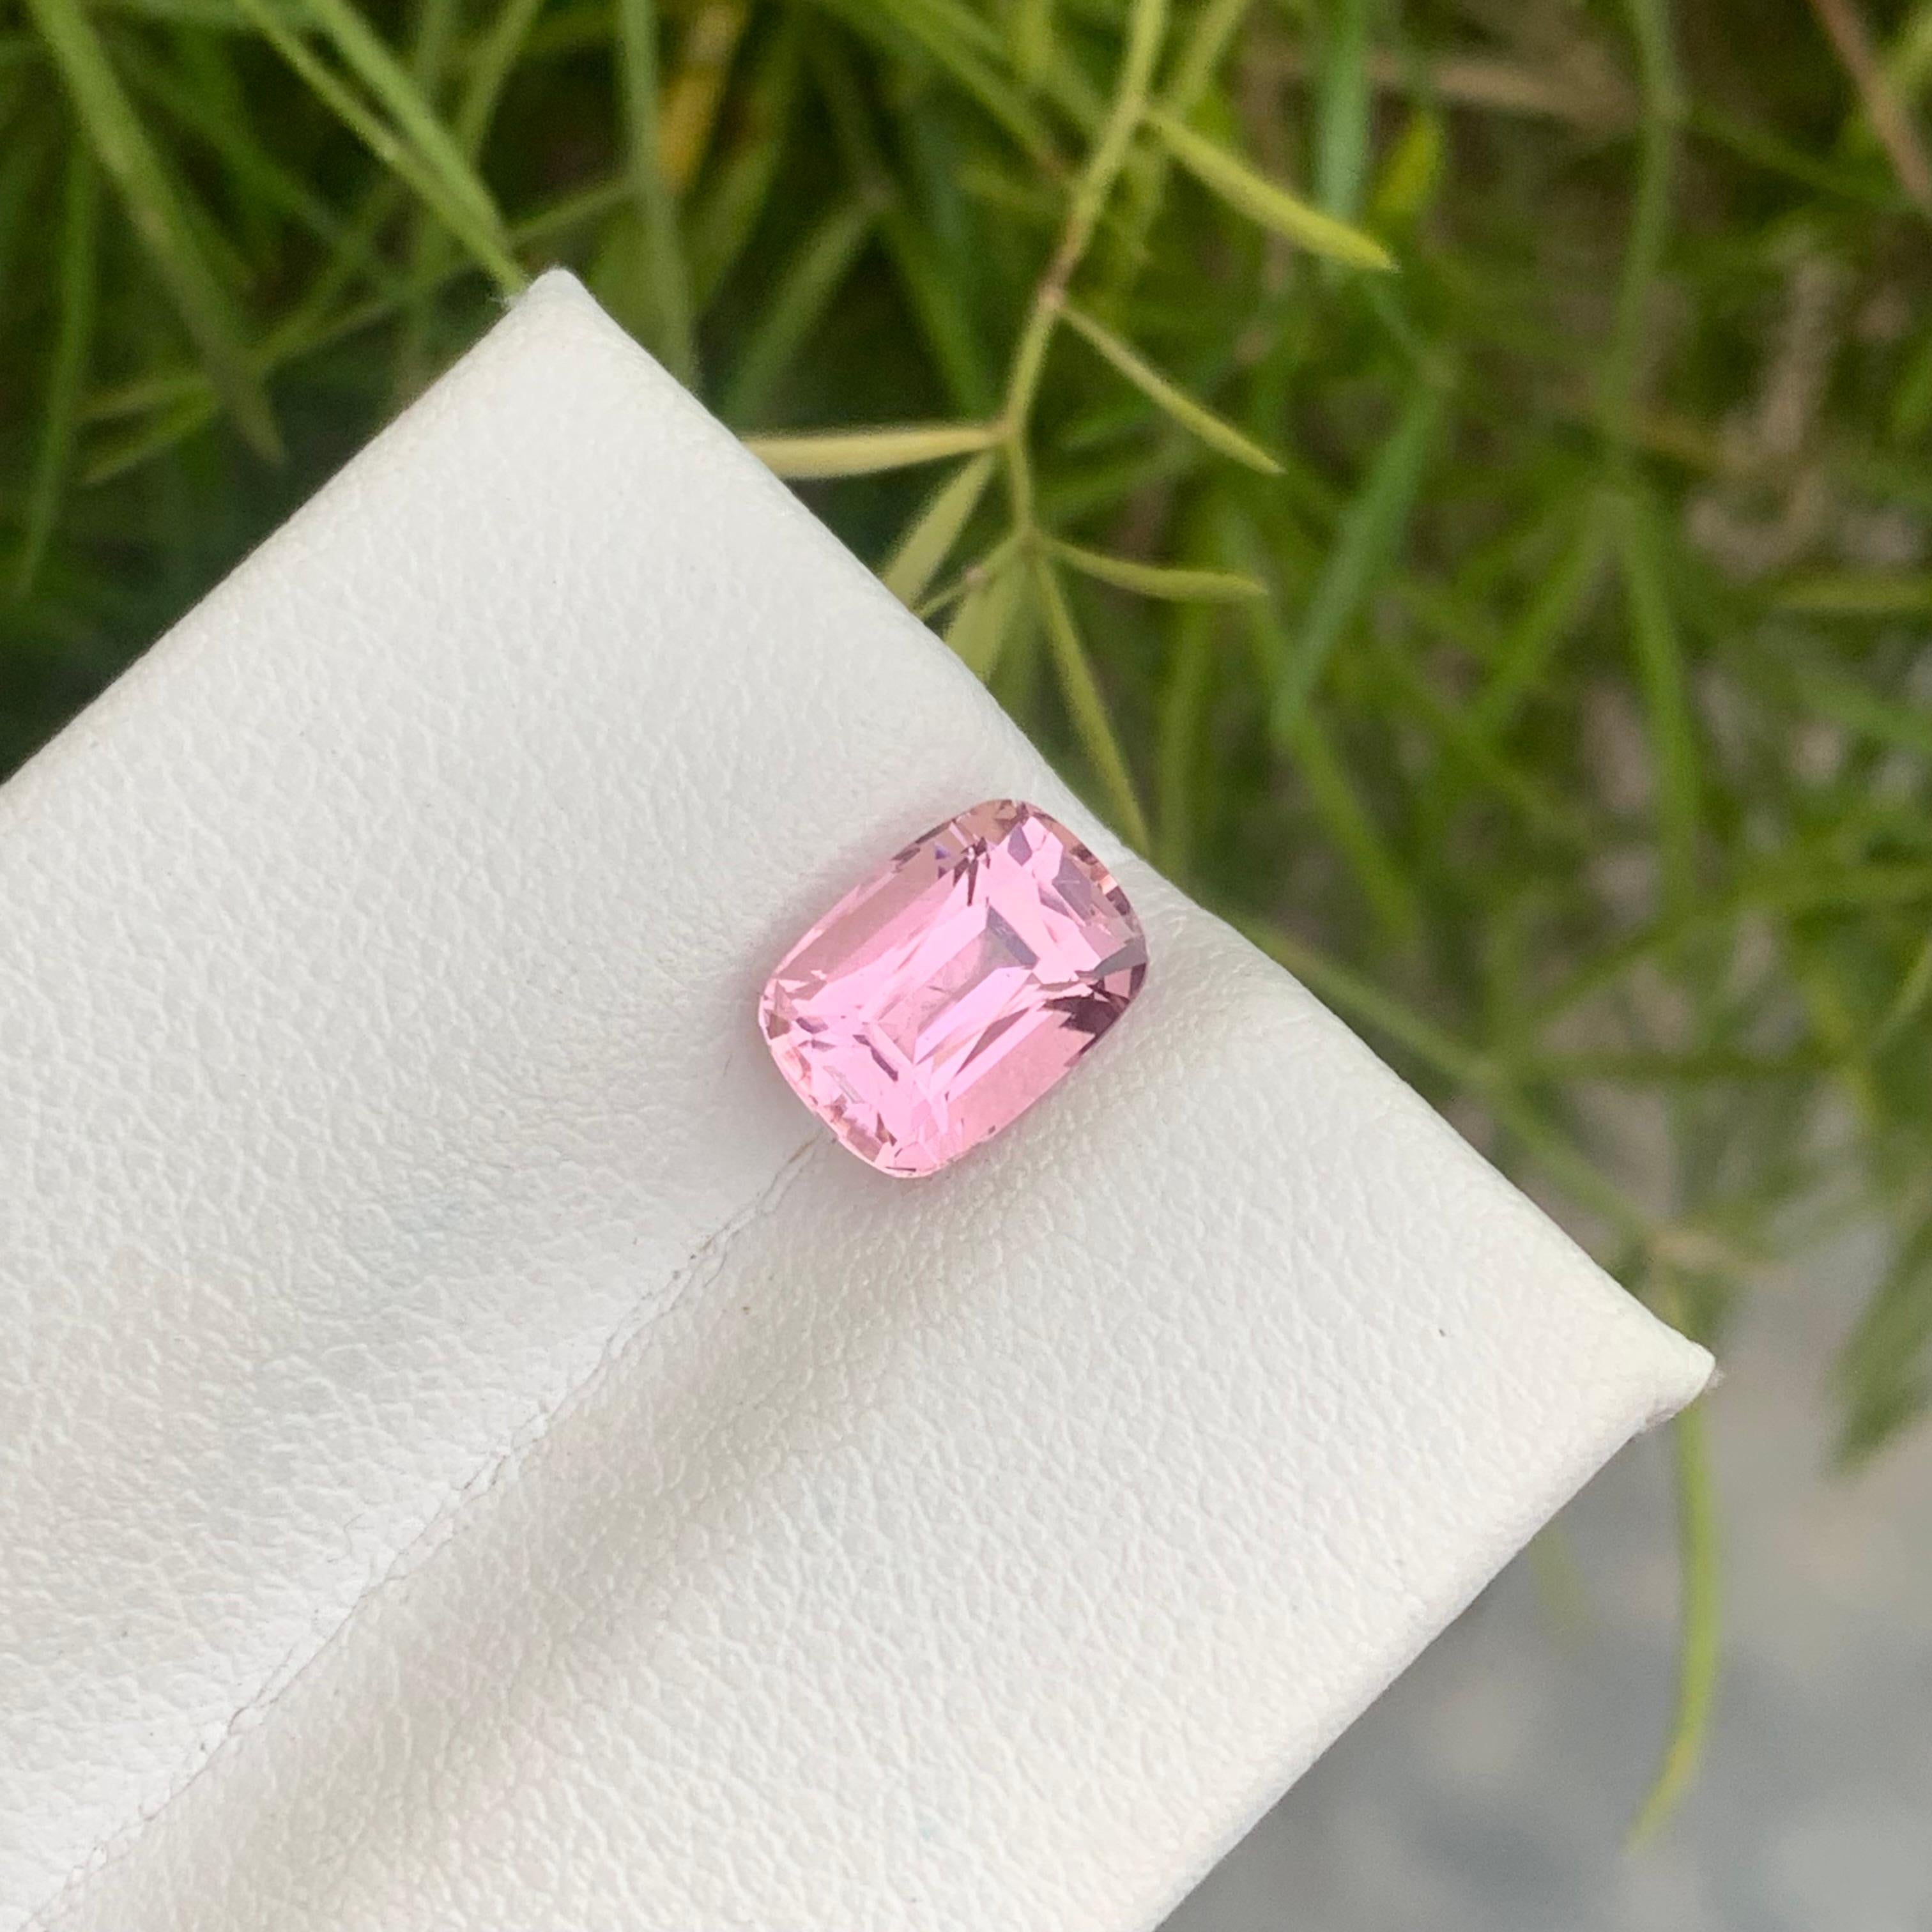 Stunning 1.70 Carat Natural Loose Pink Tourmaline For Ring Jewellery Making For Sale 6